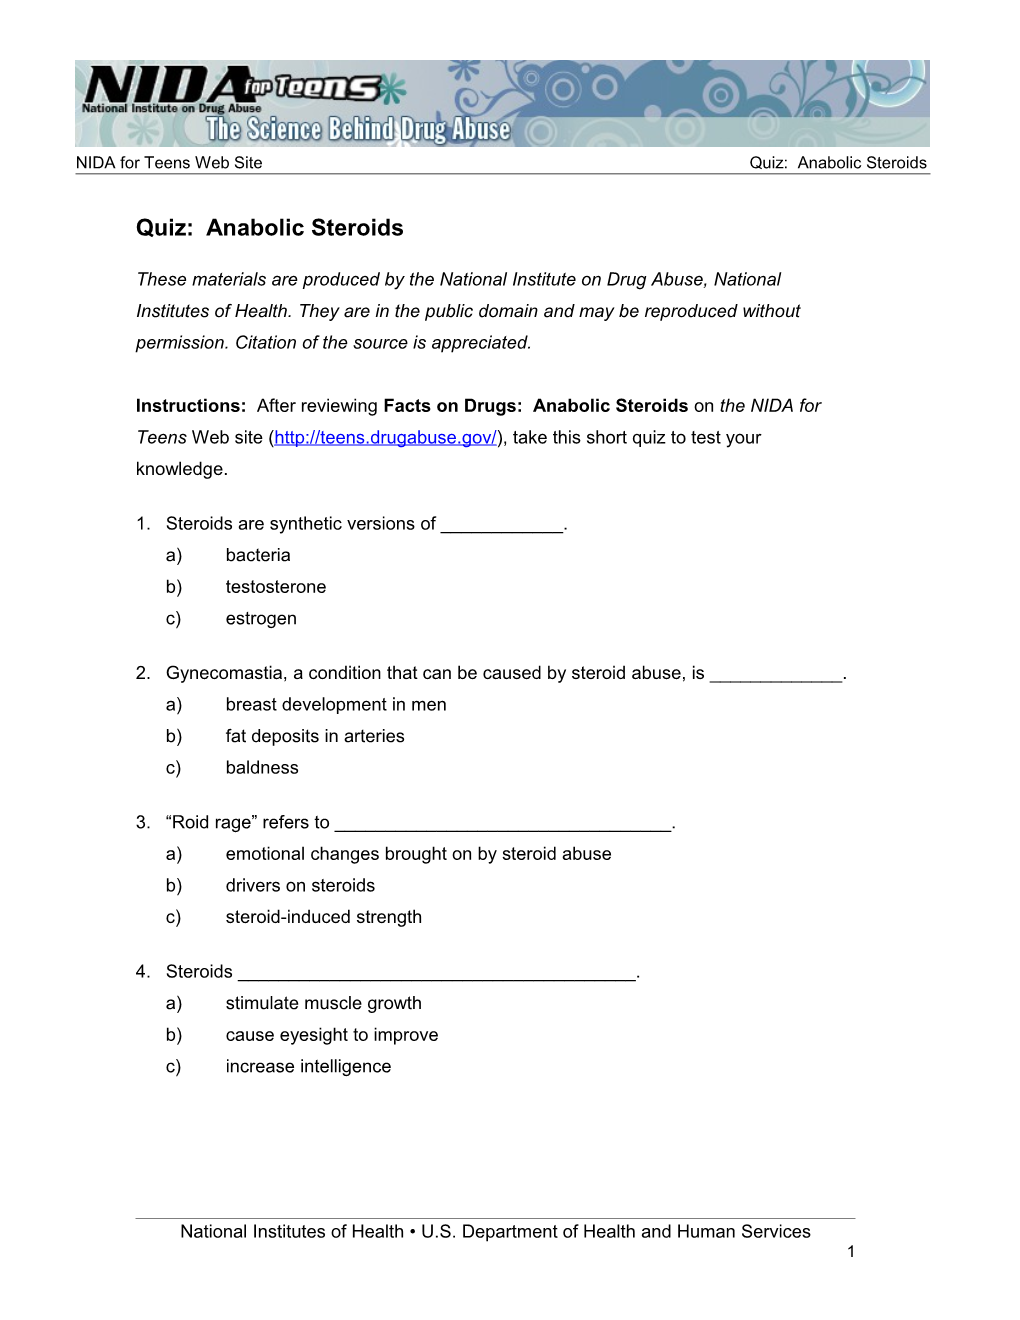 NIDA for Teens, Anabolic Steroids Quiz